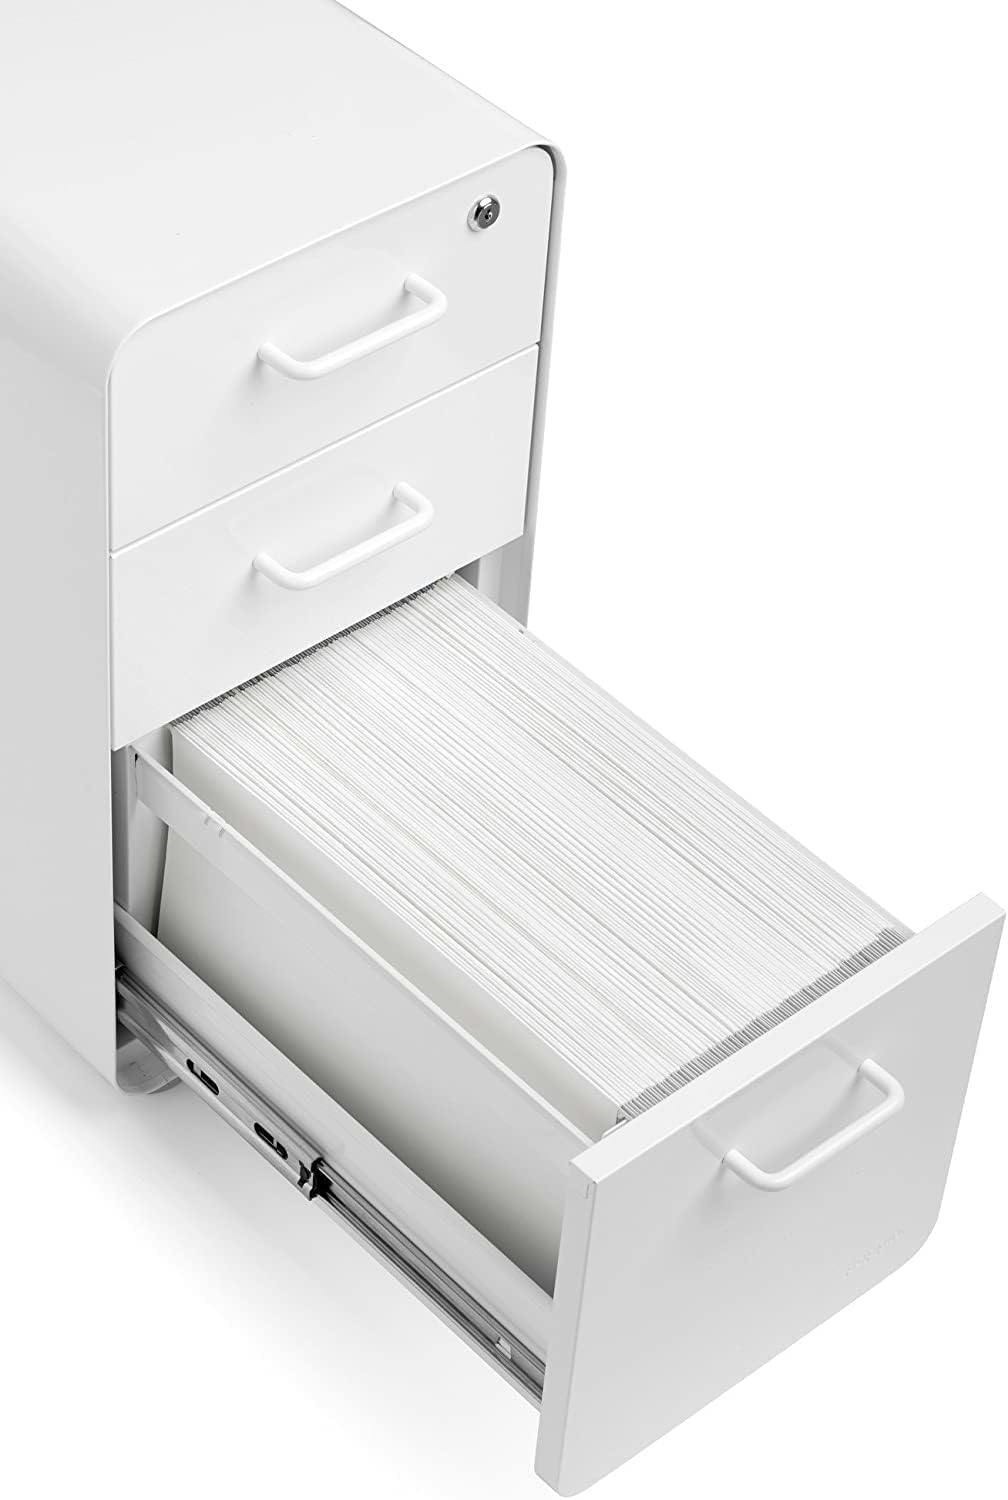 Slim Stow White 3-Drawer Vertical File Cabinet